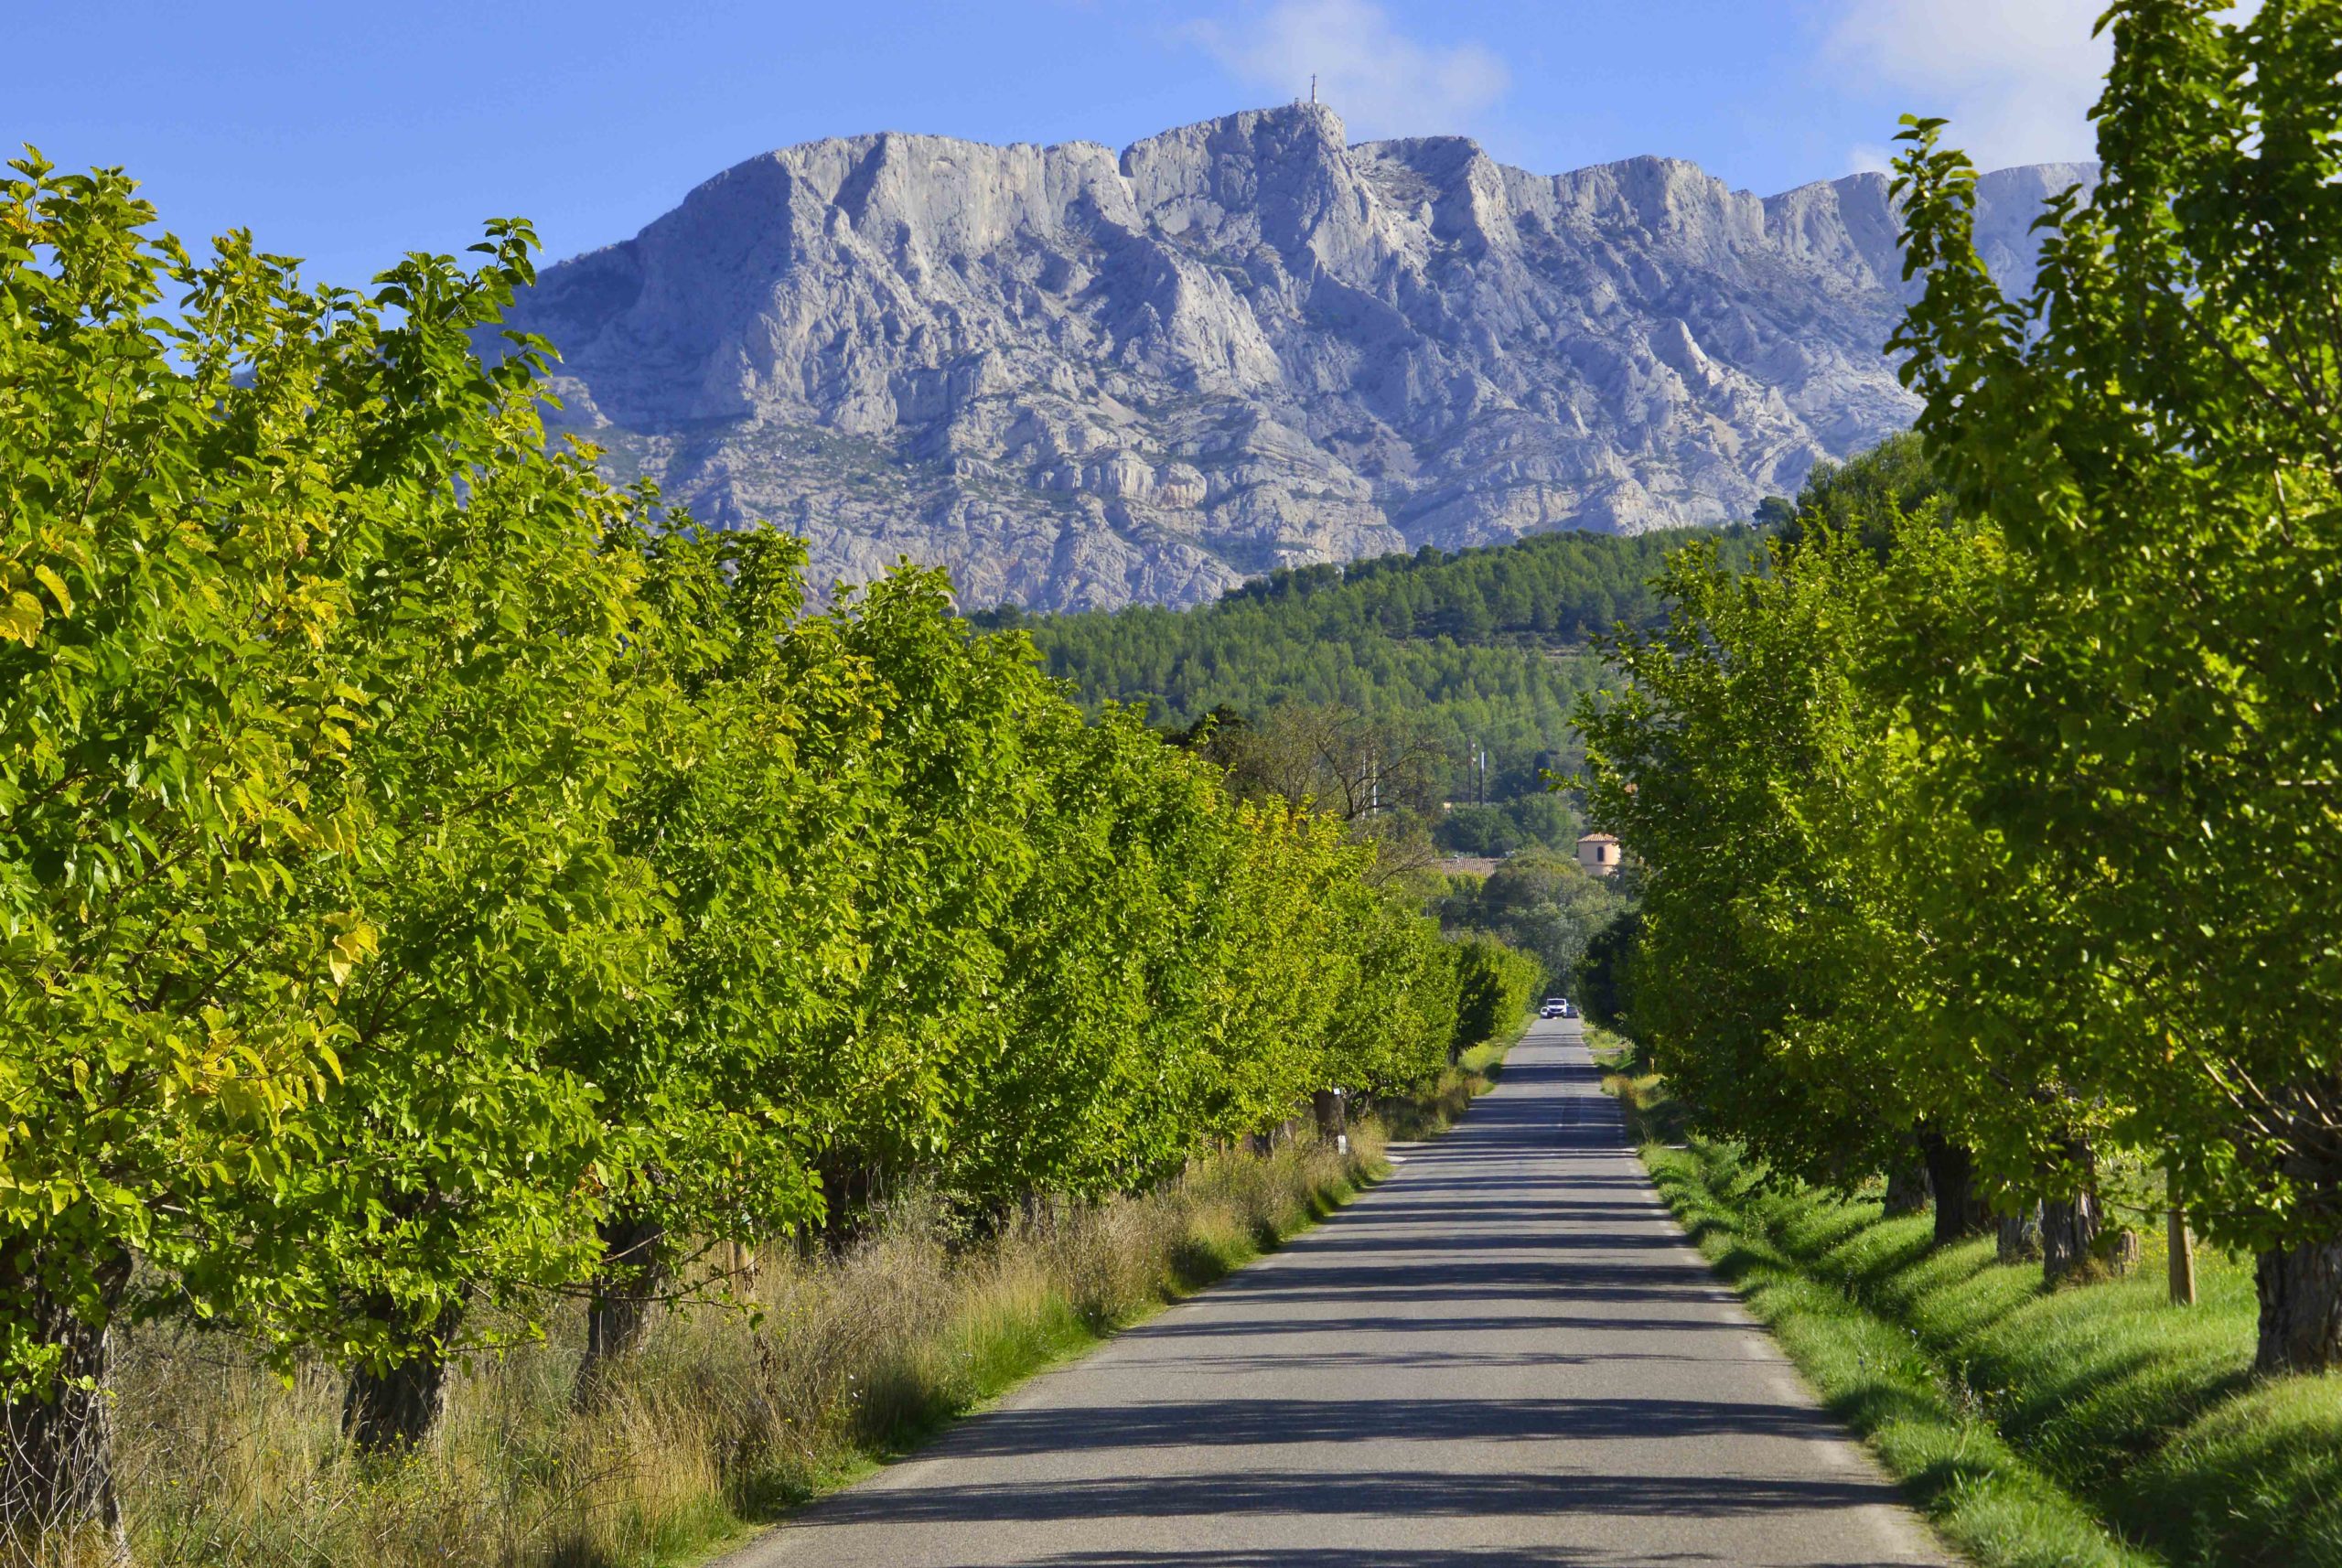 Road near Sainte-Victoire © Spielvogel - licence [CC BY-SA 3.0] from Wikimedia Commons